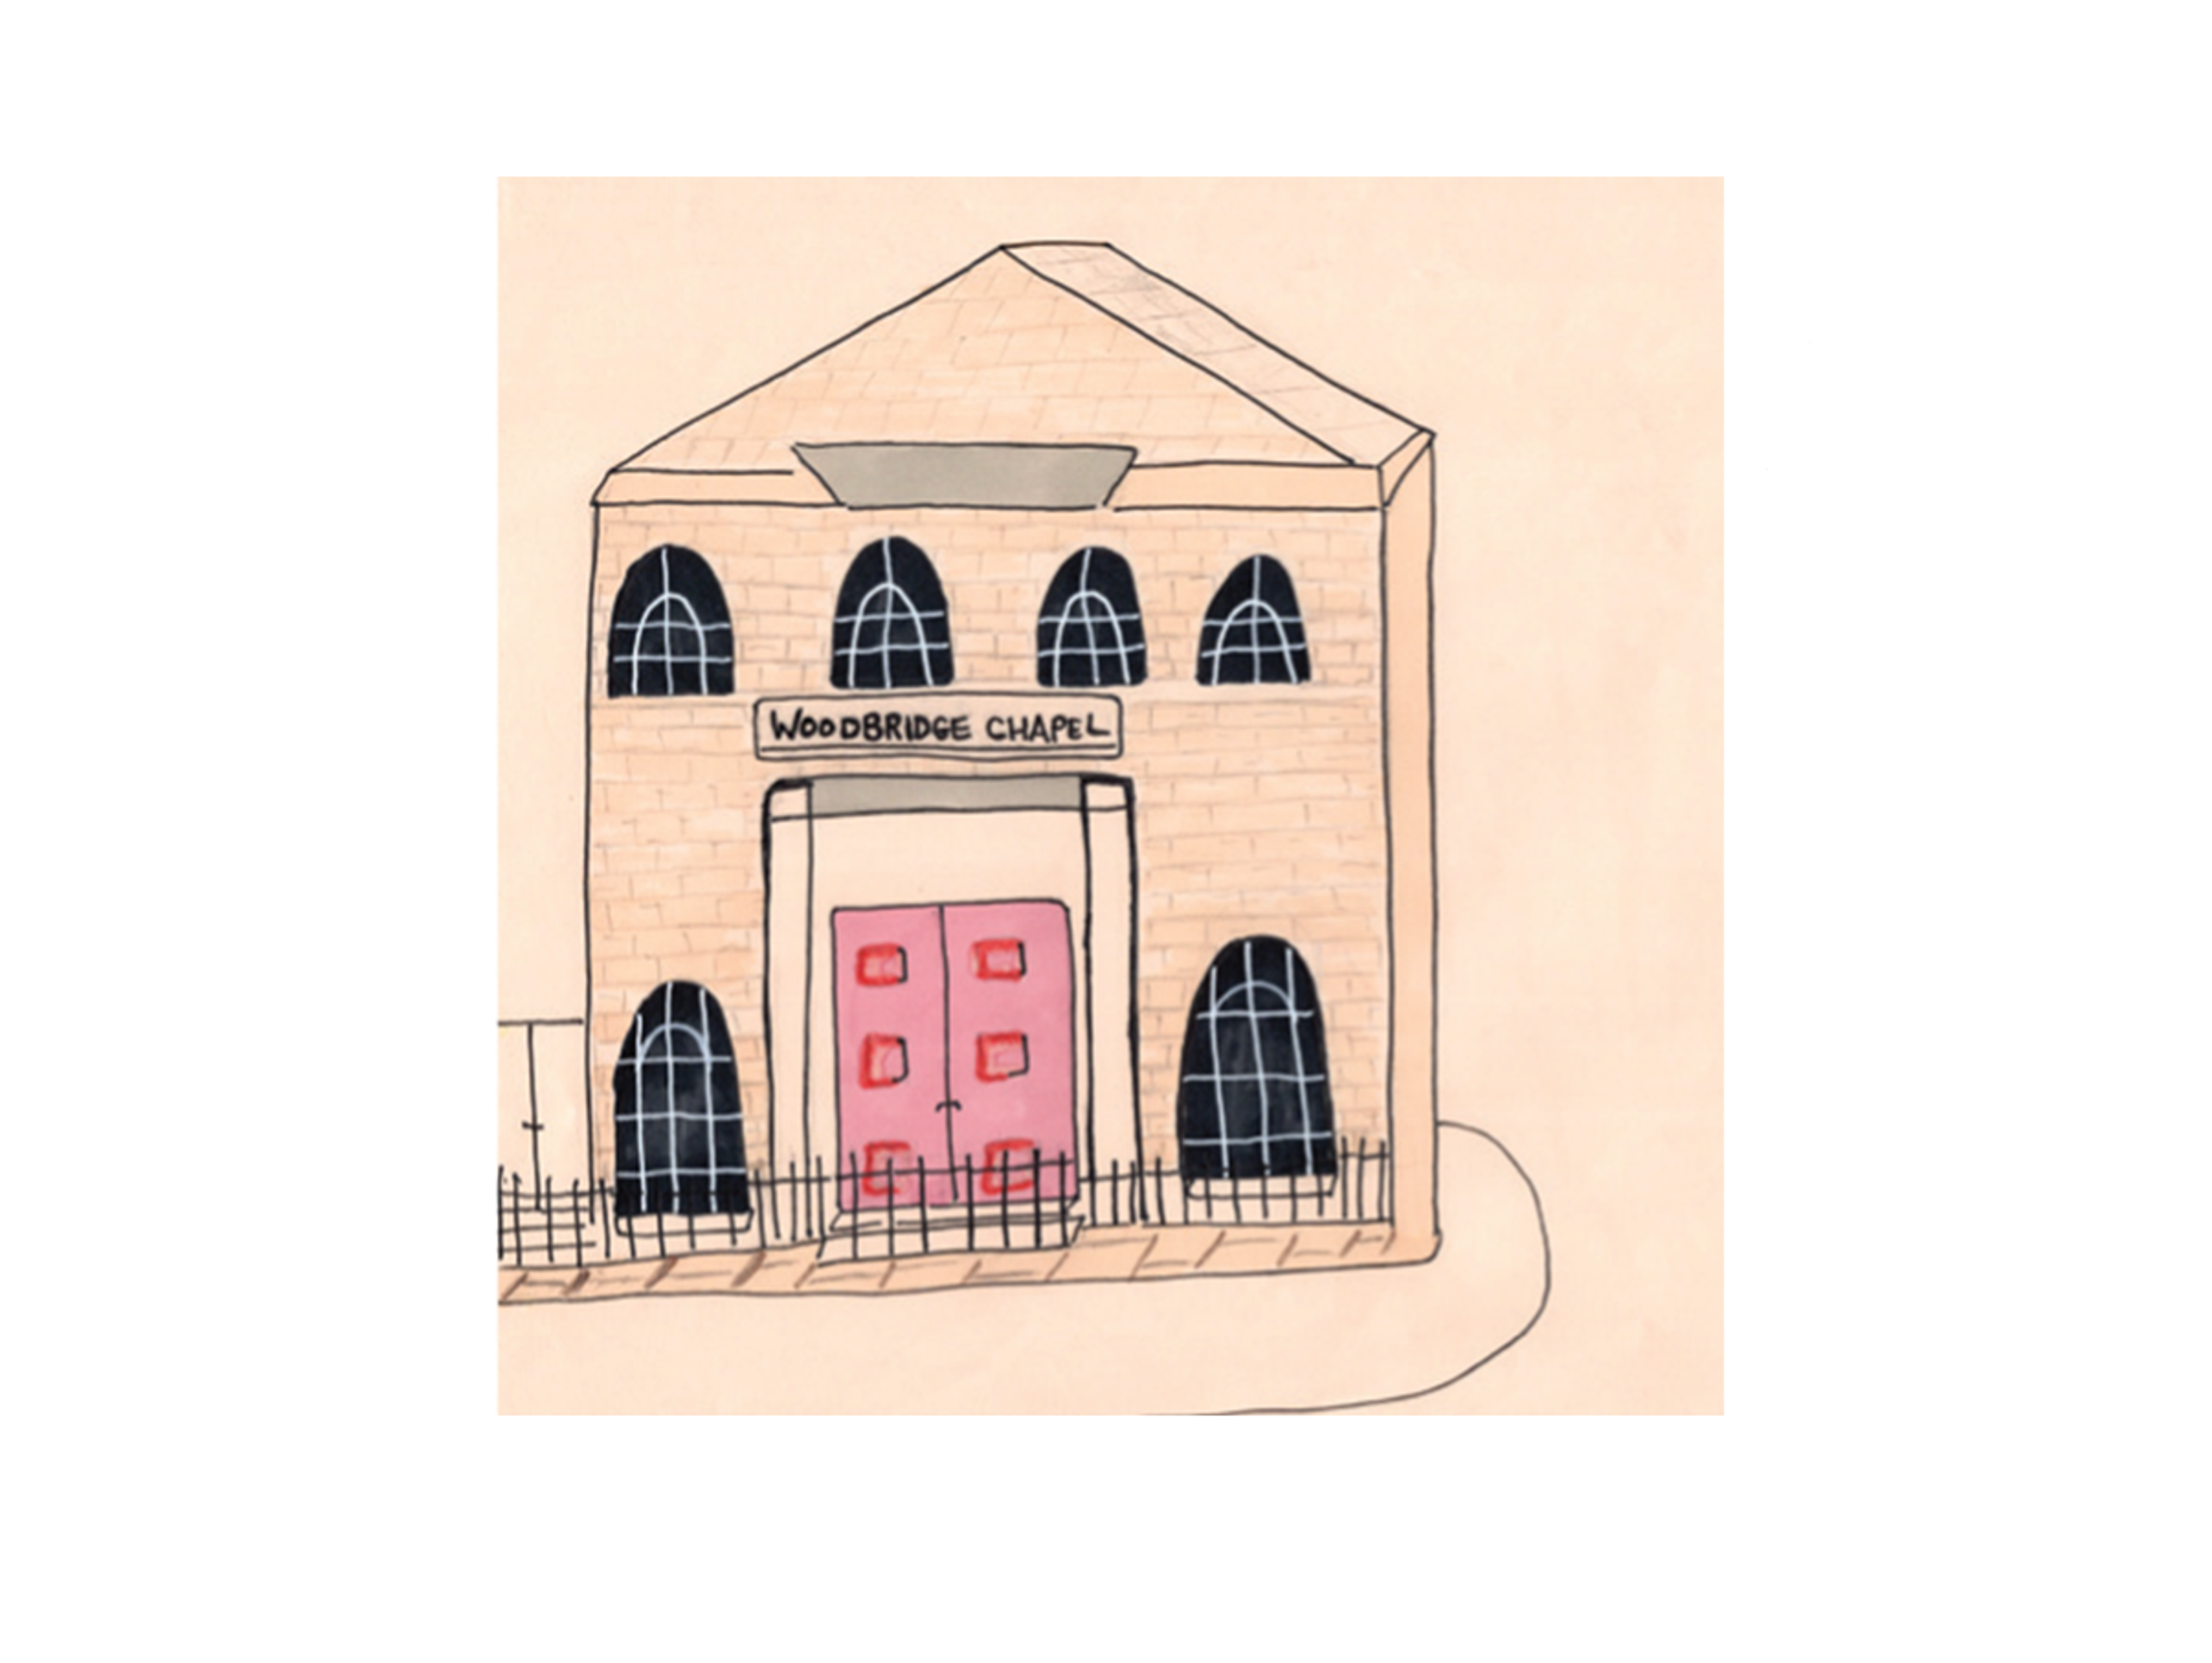 Illustration of a building with a pediment and a pink door with a sign reading Woodbridge Chapel above